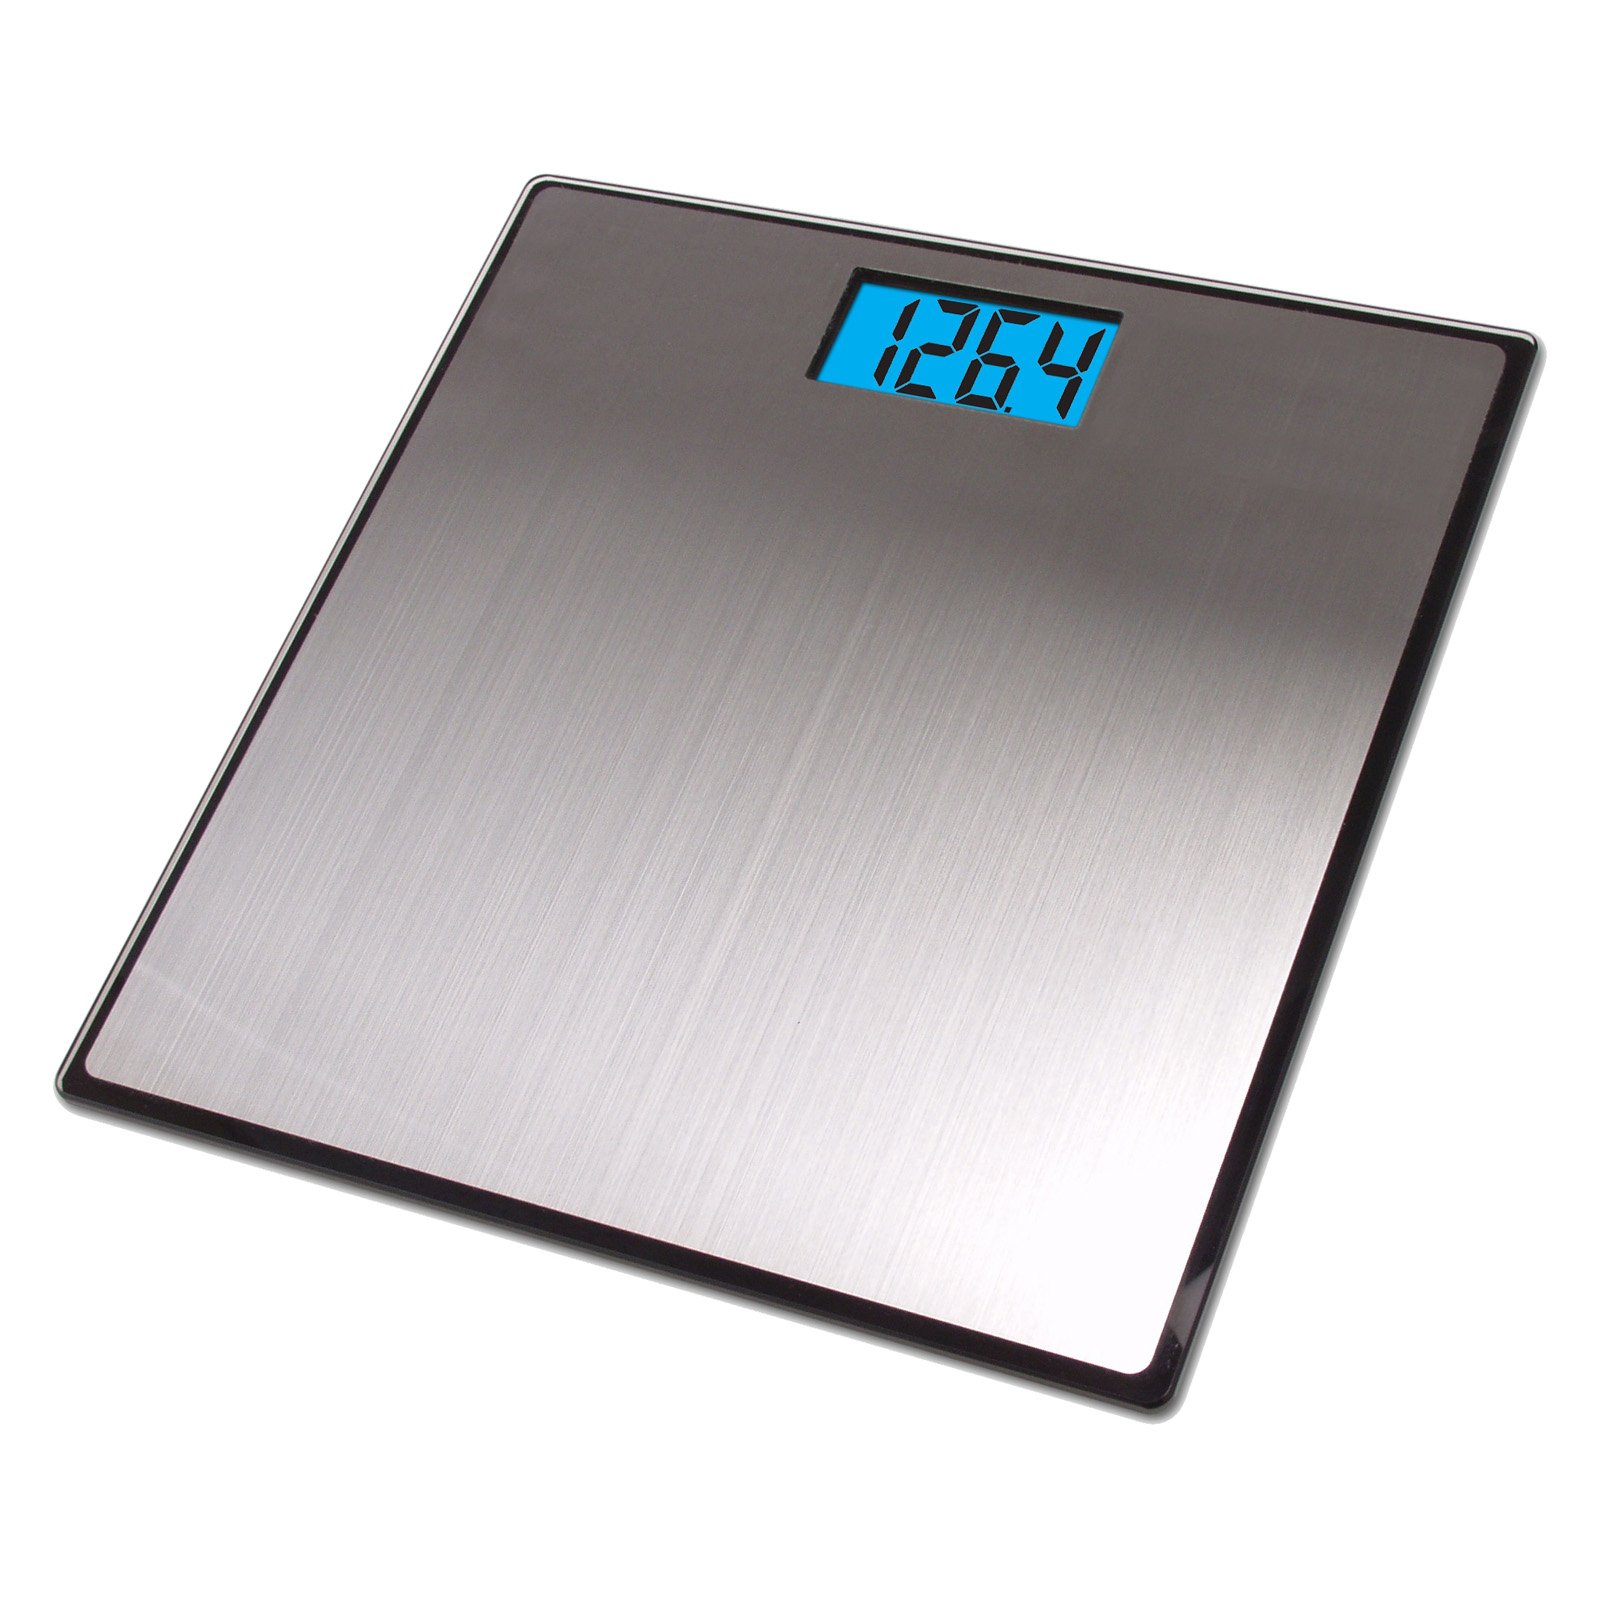 Personal Care : Weight Scales | Hayneedle.